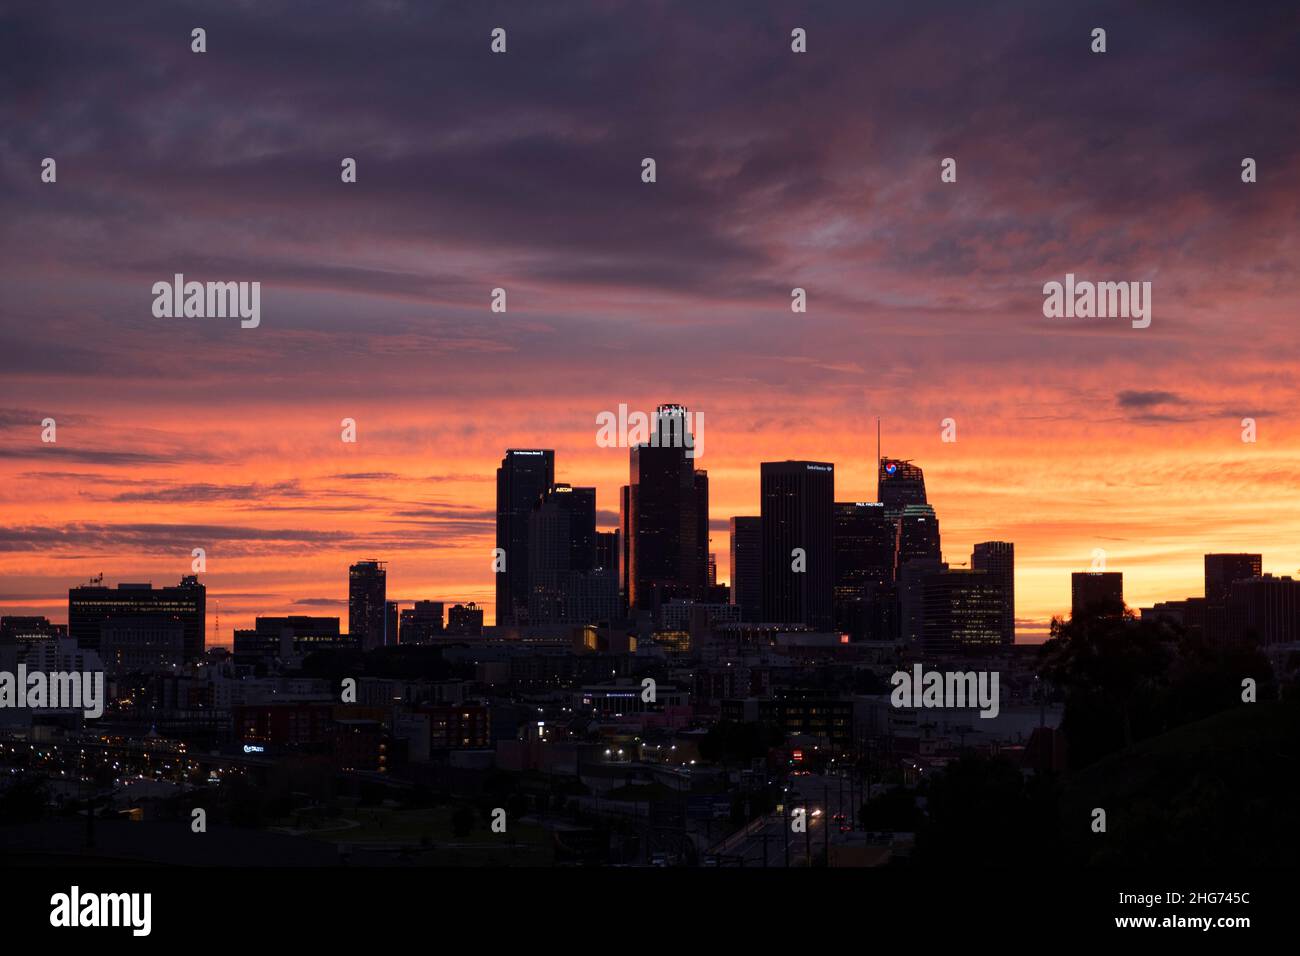 Silhouette of the downtown Los Angeles skyline with a colorful fading sunset backdrop Stock Photo